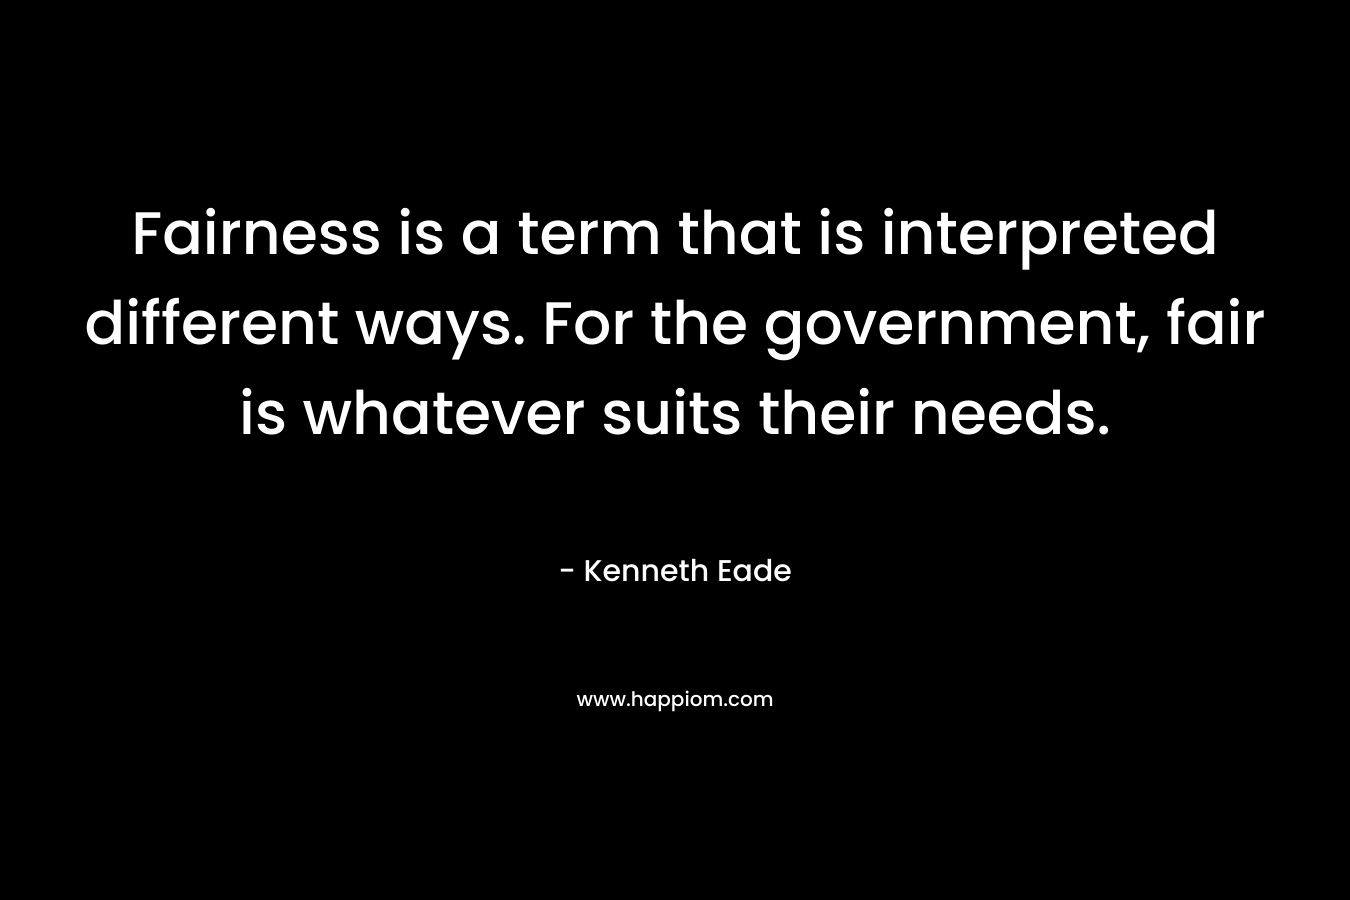 Fairness is a term that is interpreted different ways. For the government, fair is whatever suits their needs.